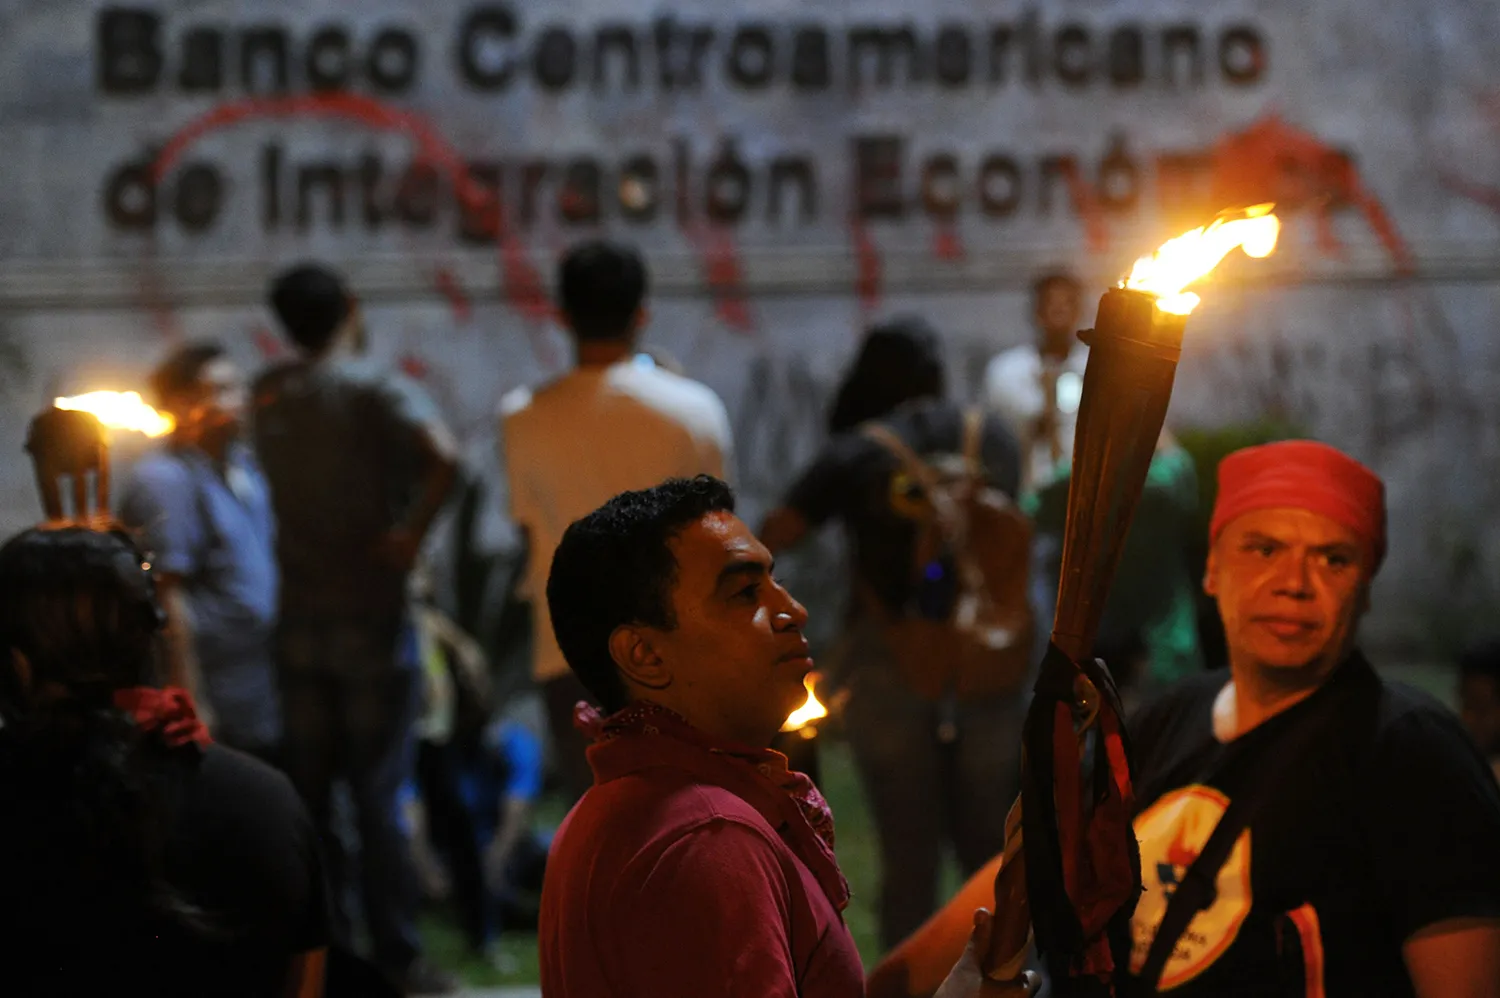 A man holding a lit torch stands among a small crowd of protesters outside the Central American Financial Integration Bank in Tegucigalpa. A red paint-splattered sign for the bank is seen behind the demonstrators.